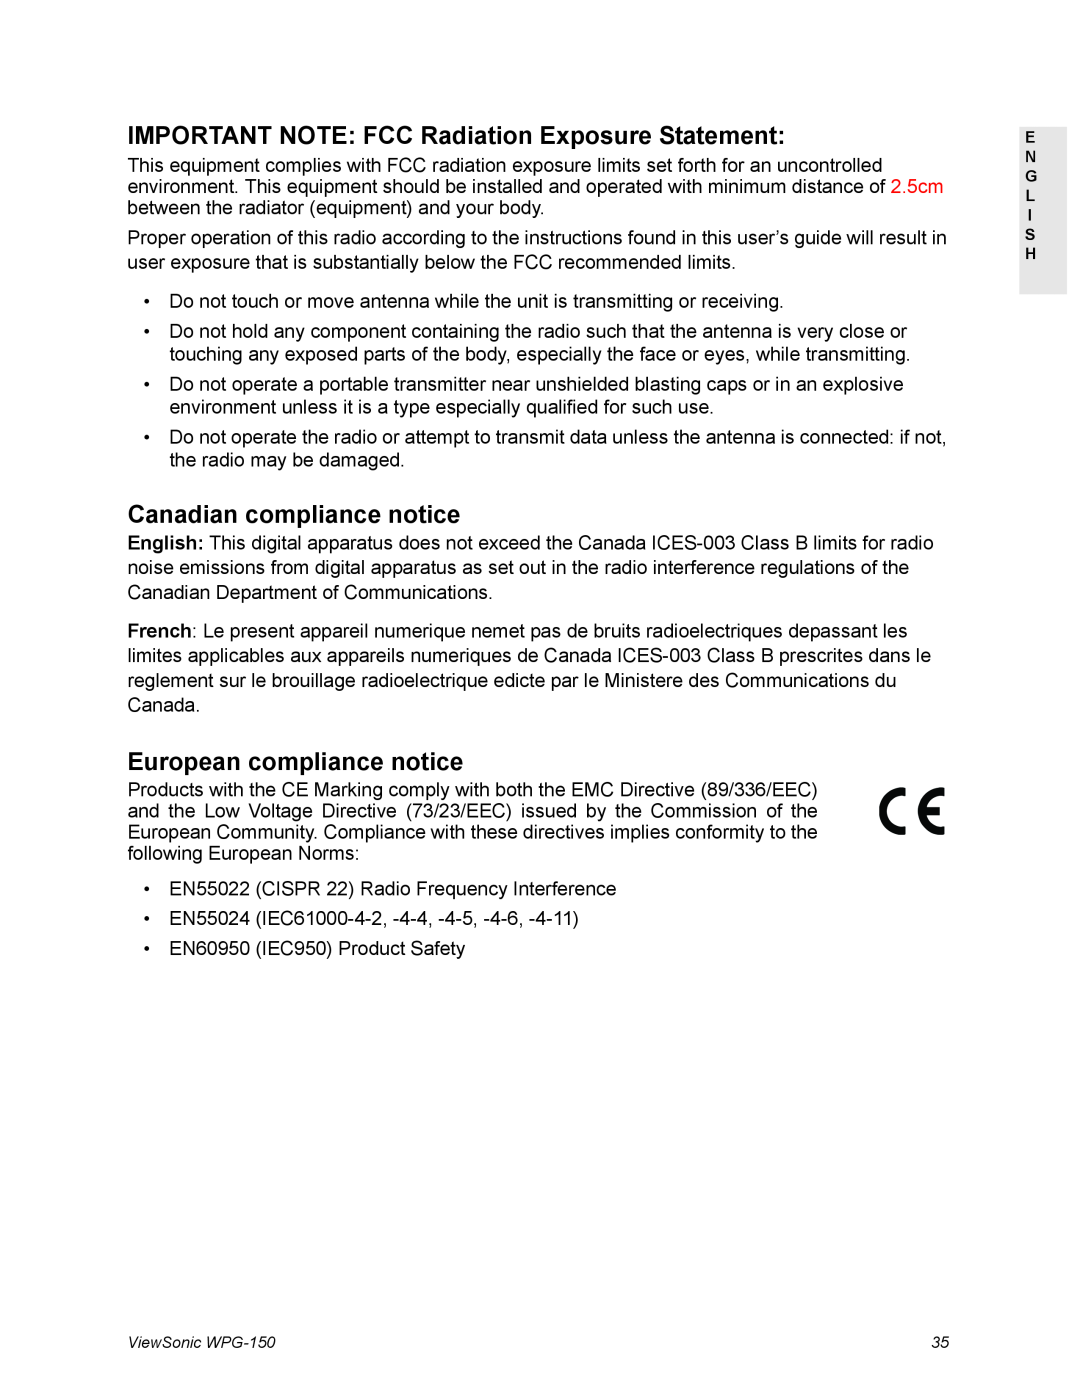 ViewSonic WPG-150 IMPORTANT NOTE FCC Radiation Exposure Statement, Canadian compliance notice, European compliance notice 